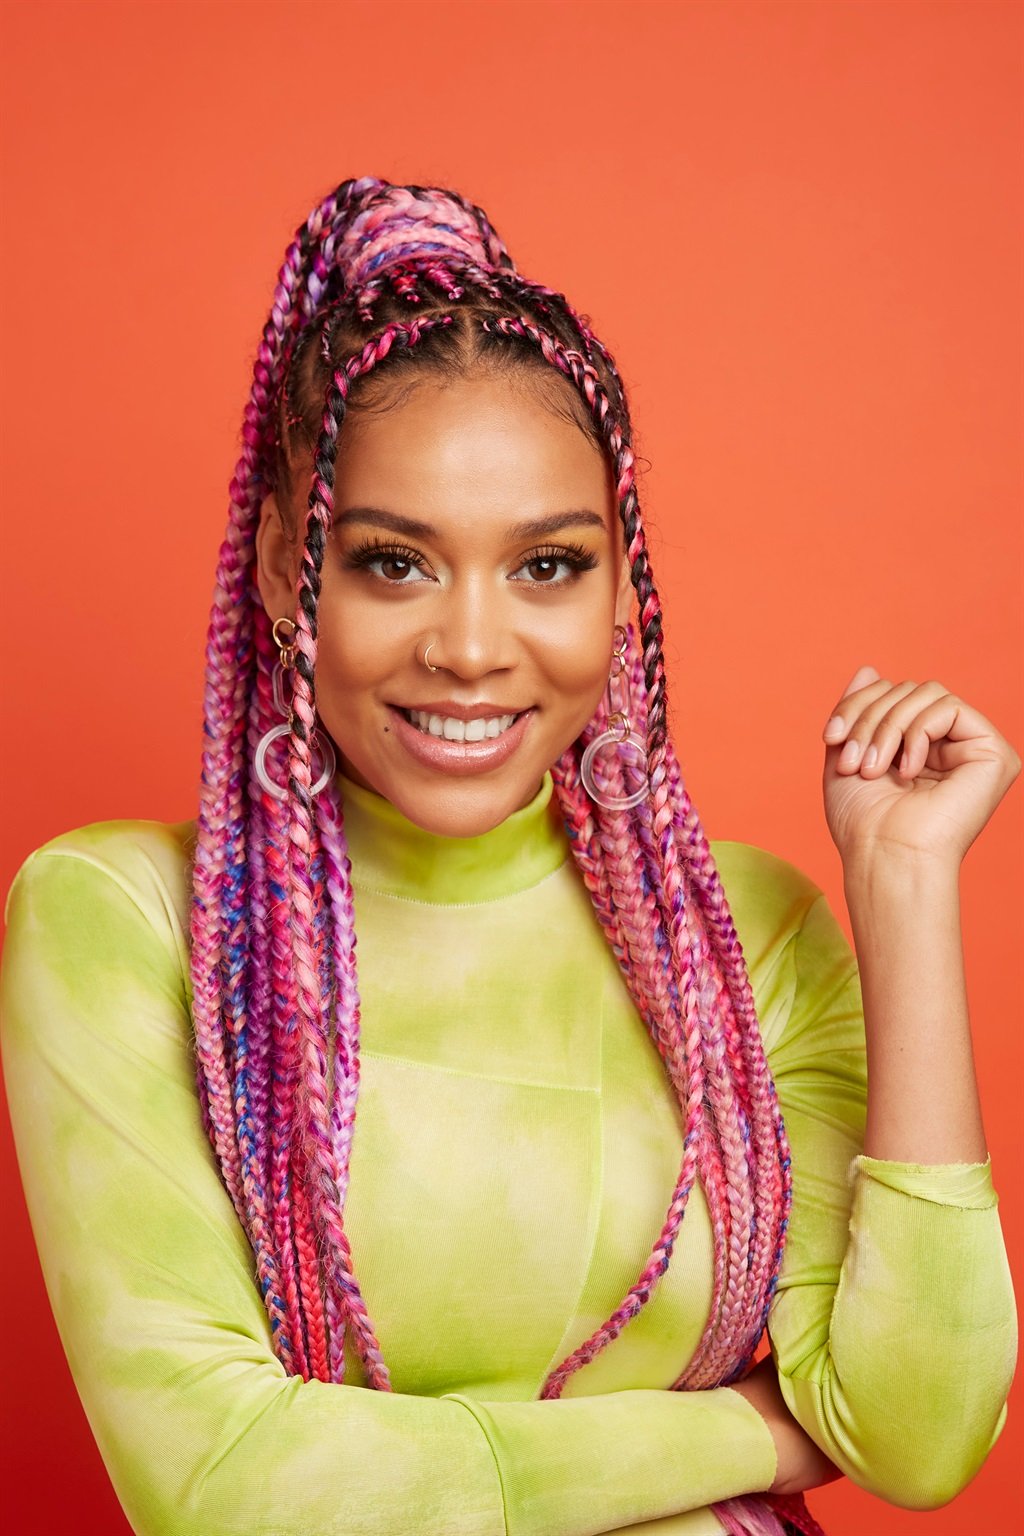 Multi-award-winning star Sho Madjozi is putting her home province of Limpopo and her Tsonga heritage on the world map